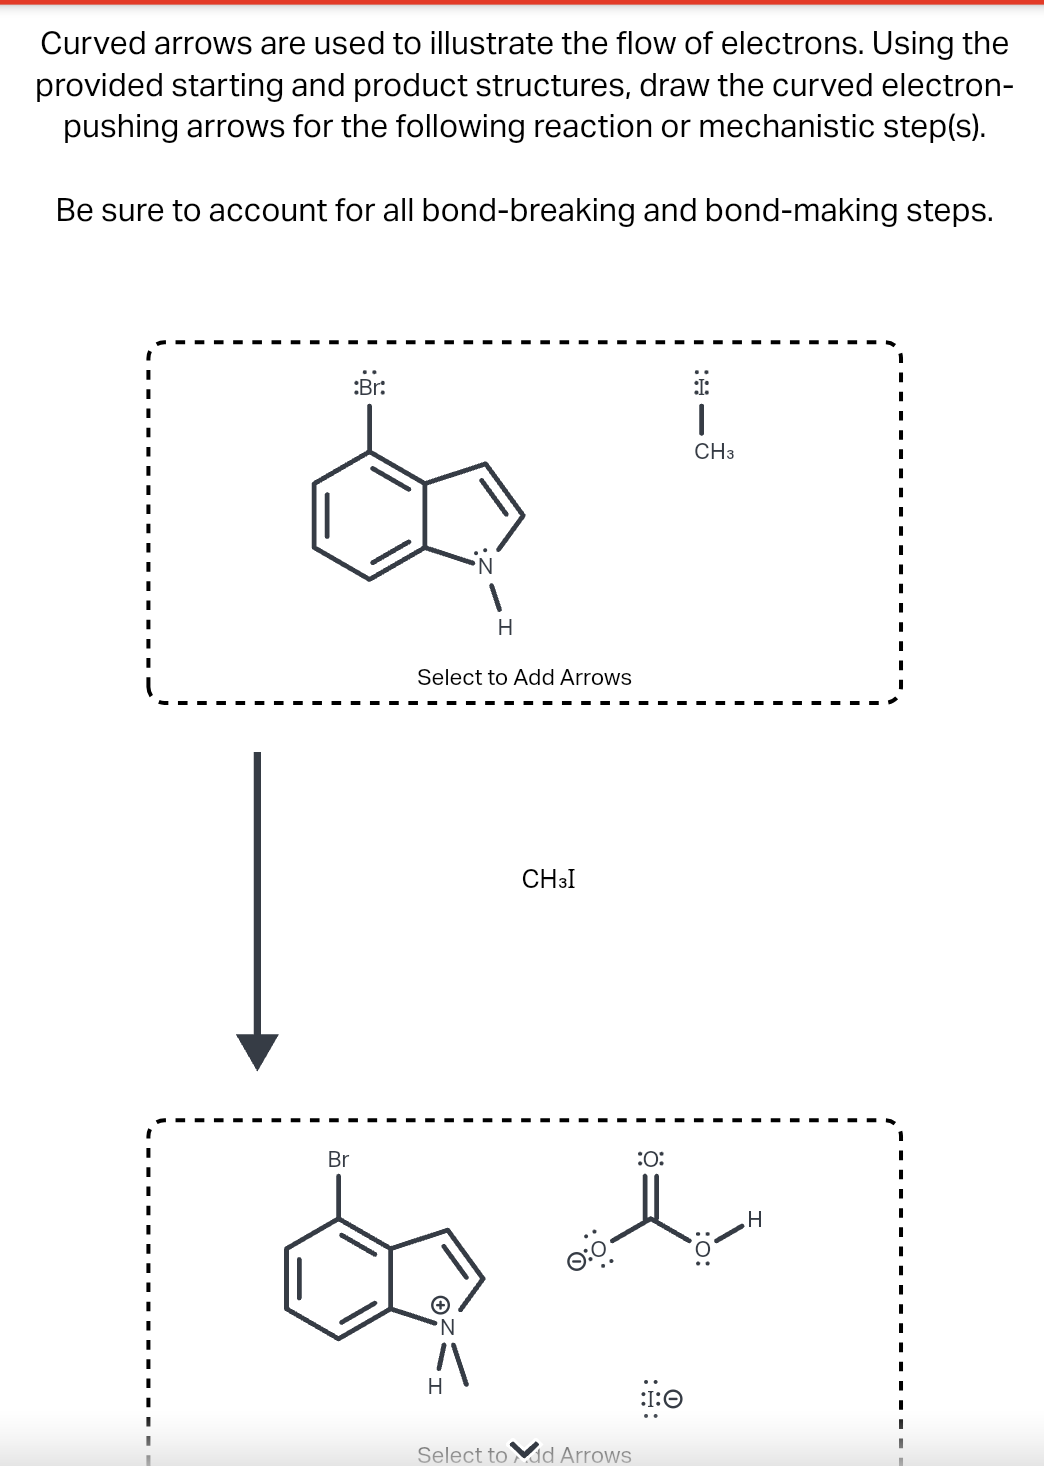 Curved arrows are used to illustrate the flow of electrons. Using the
provided starting and product structures, draw the curved electron-
pushing arrows for the following reaction or mechanistic step(s).
Be sure to account for all bond-breaking and bond-making steps.
:Br:
H
Select to Add Arrows
Br
d
N
H
CH3I
Select to dd Arrows
:O:
:I:0
1
CH3
H